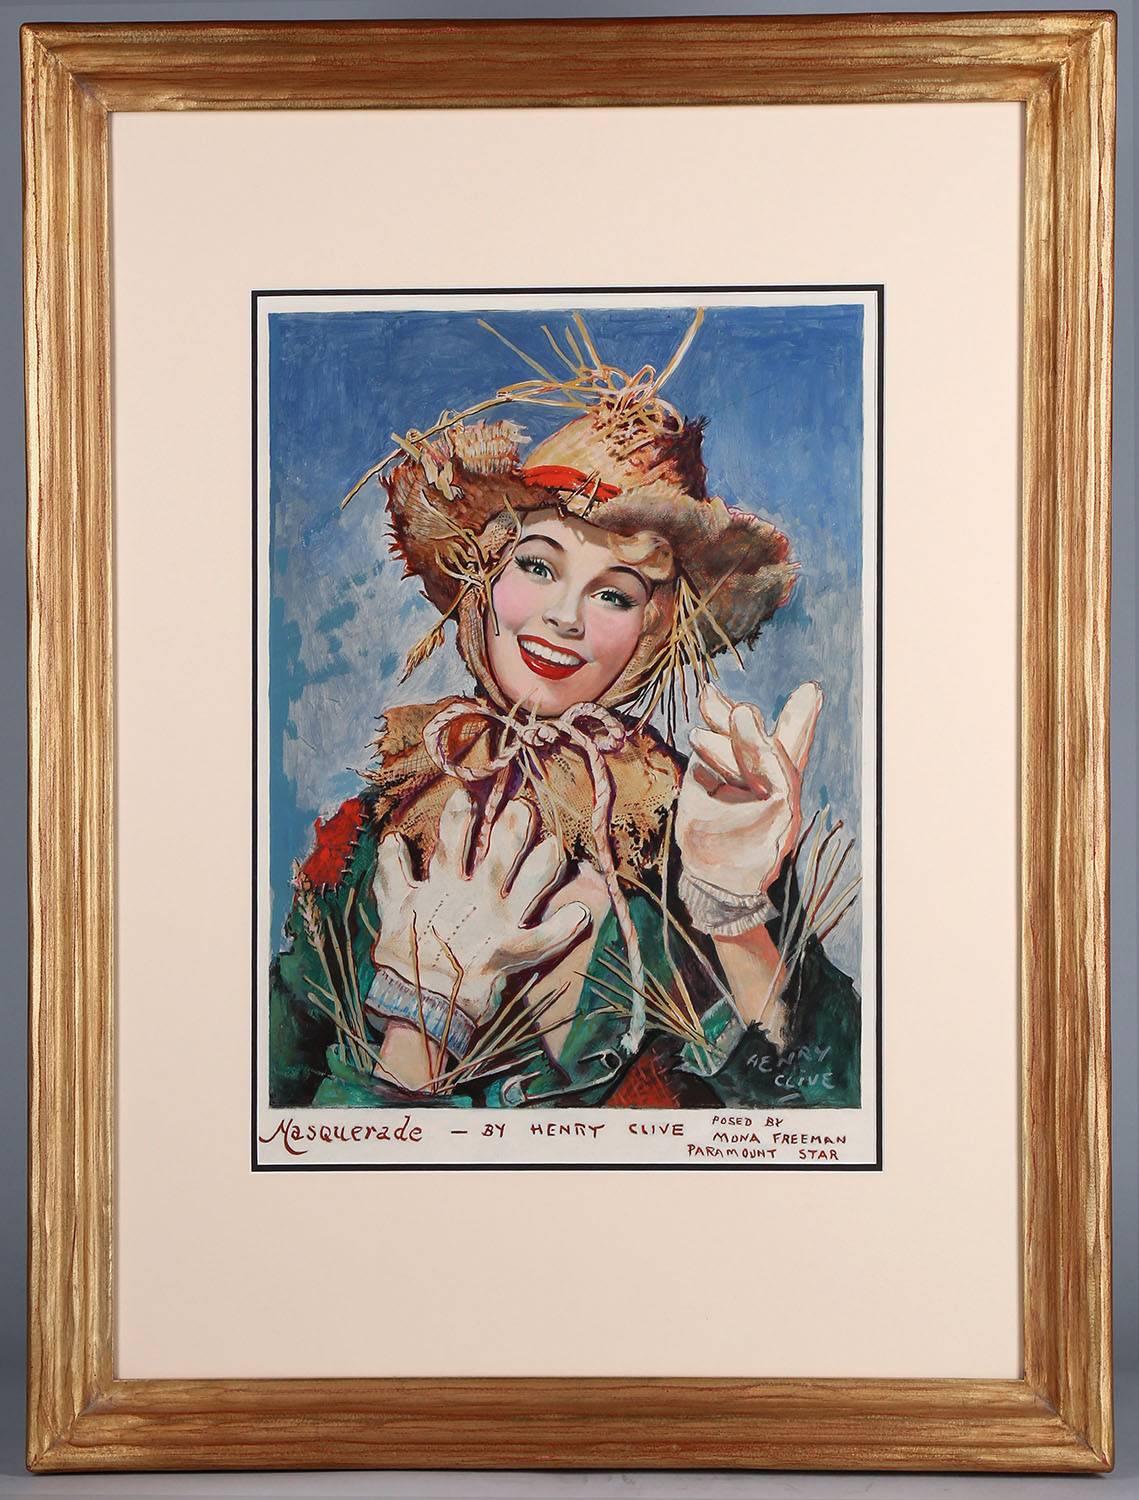 Henry Clive Portrait Painting - Masquarade - A Scarecrow